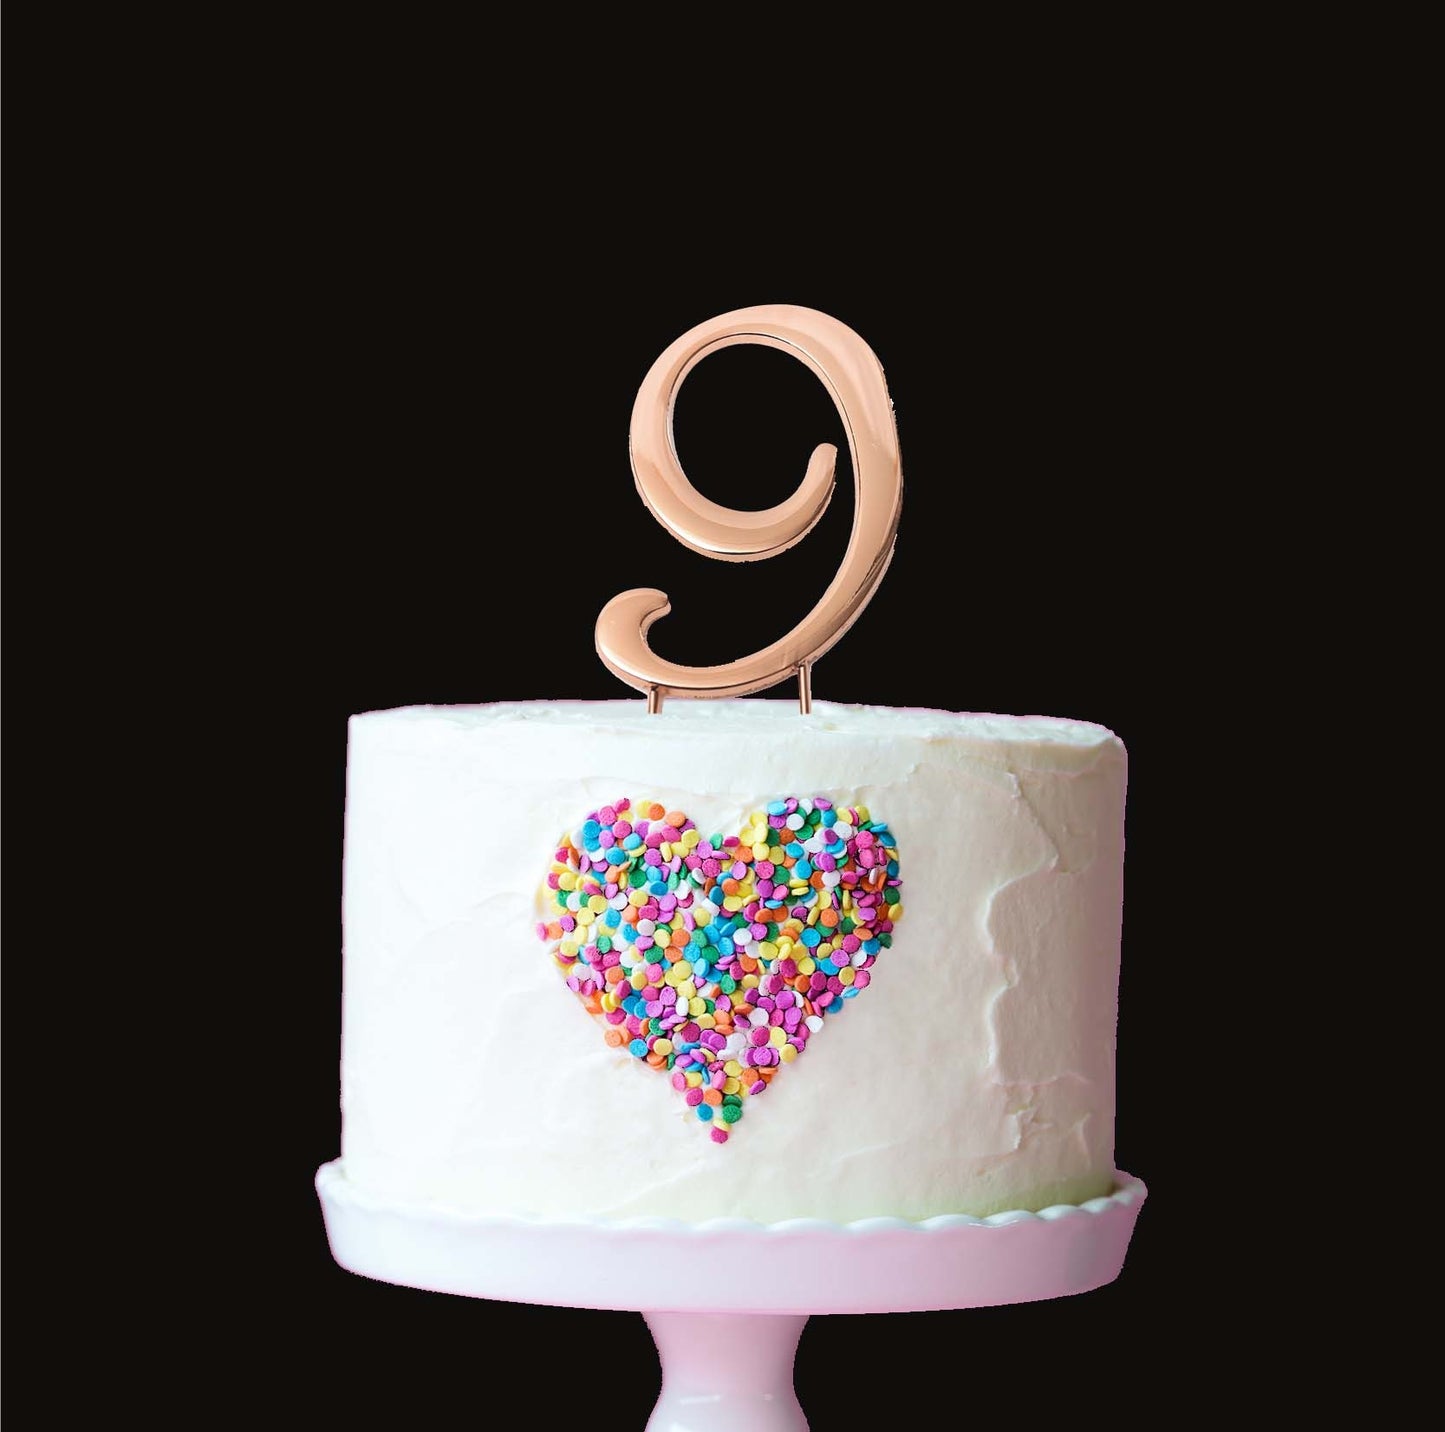 Rose Gold metal numeral 9 cake topper pick